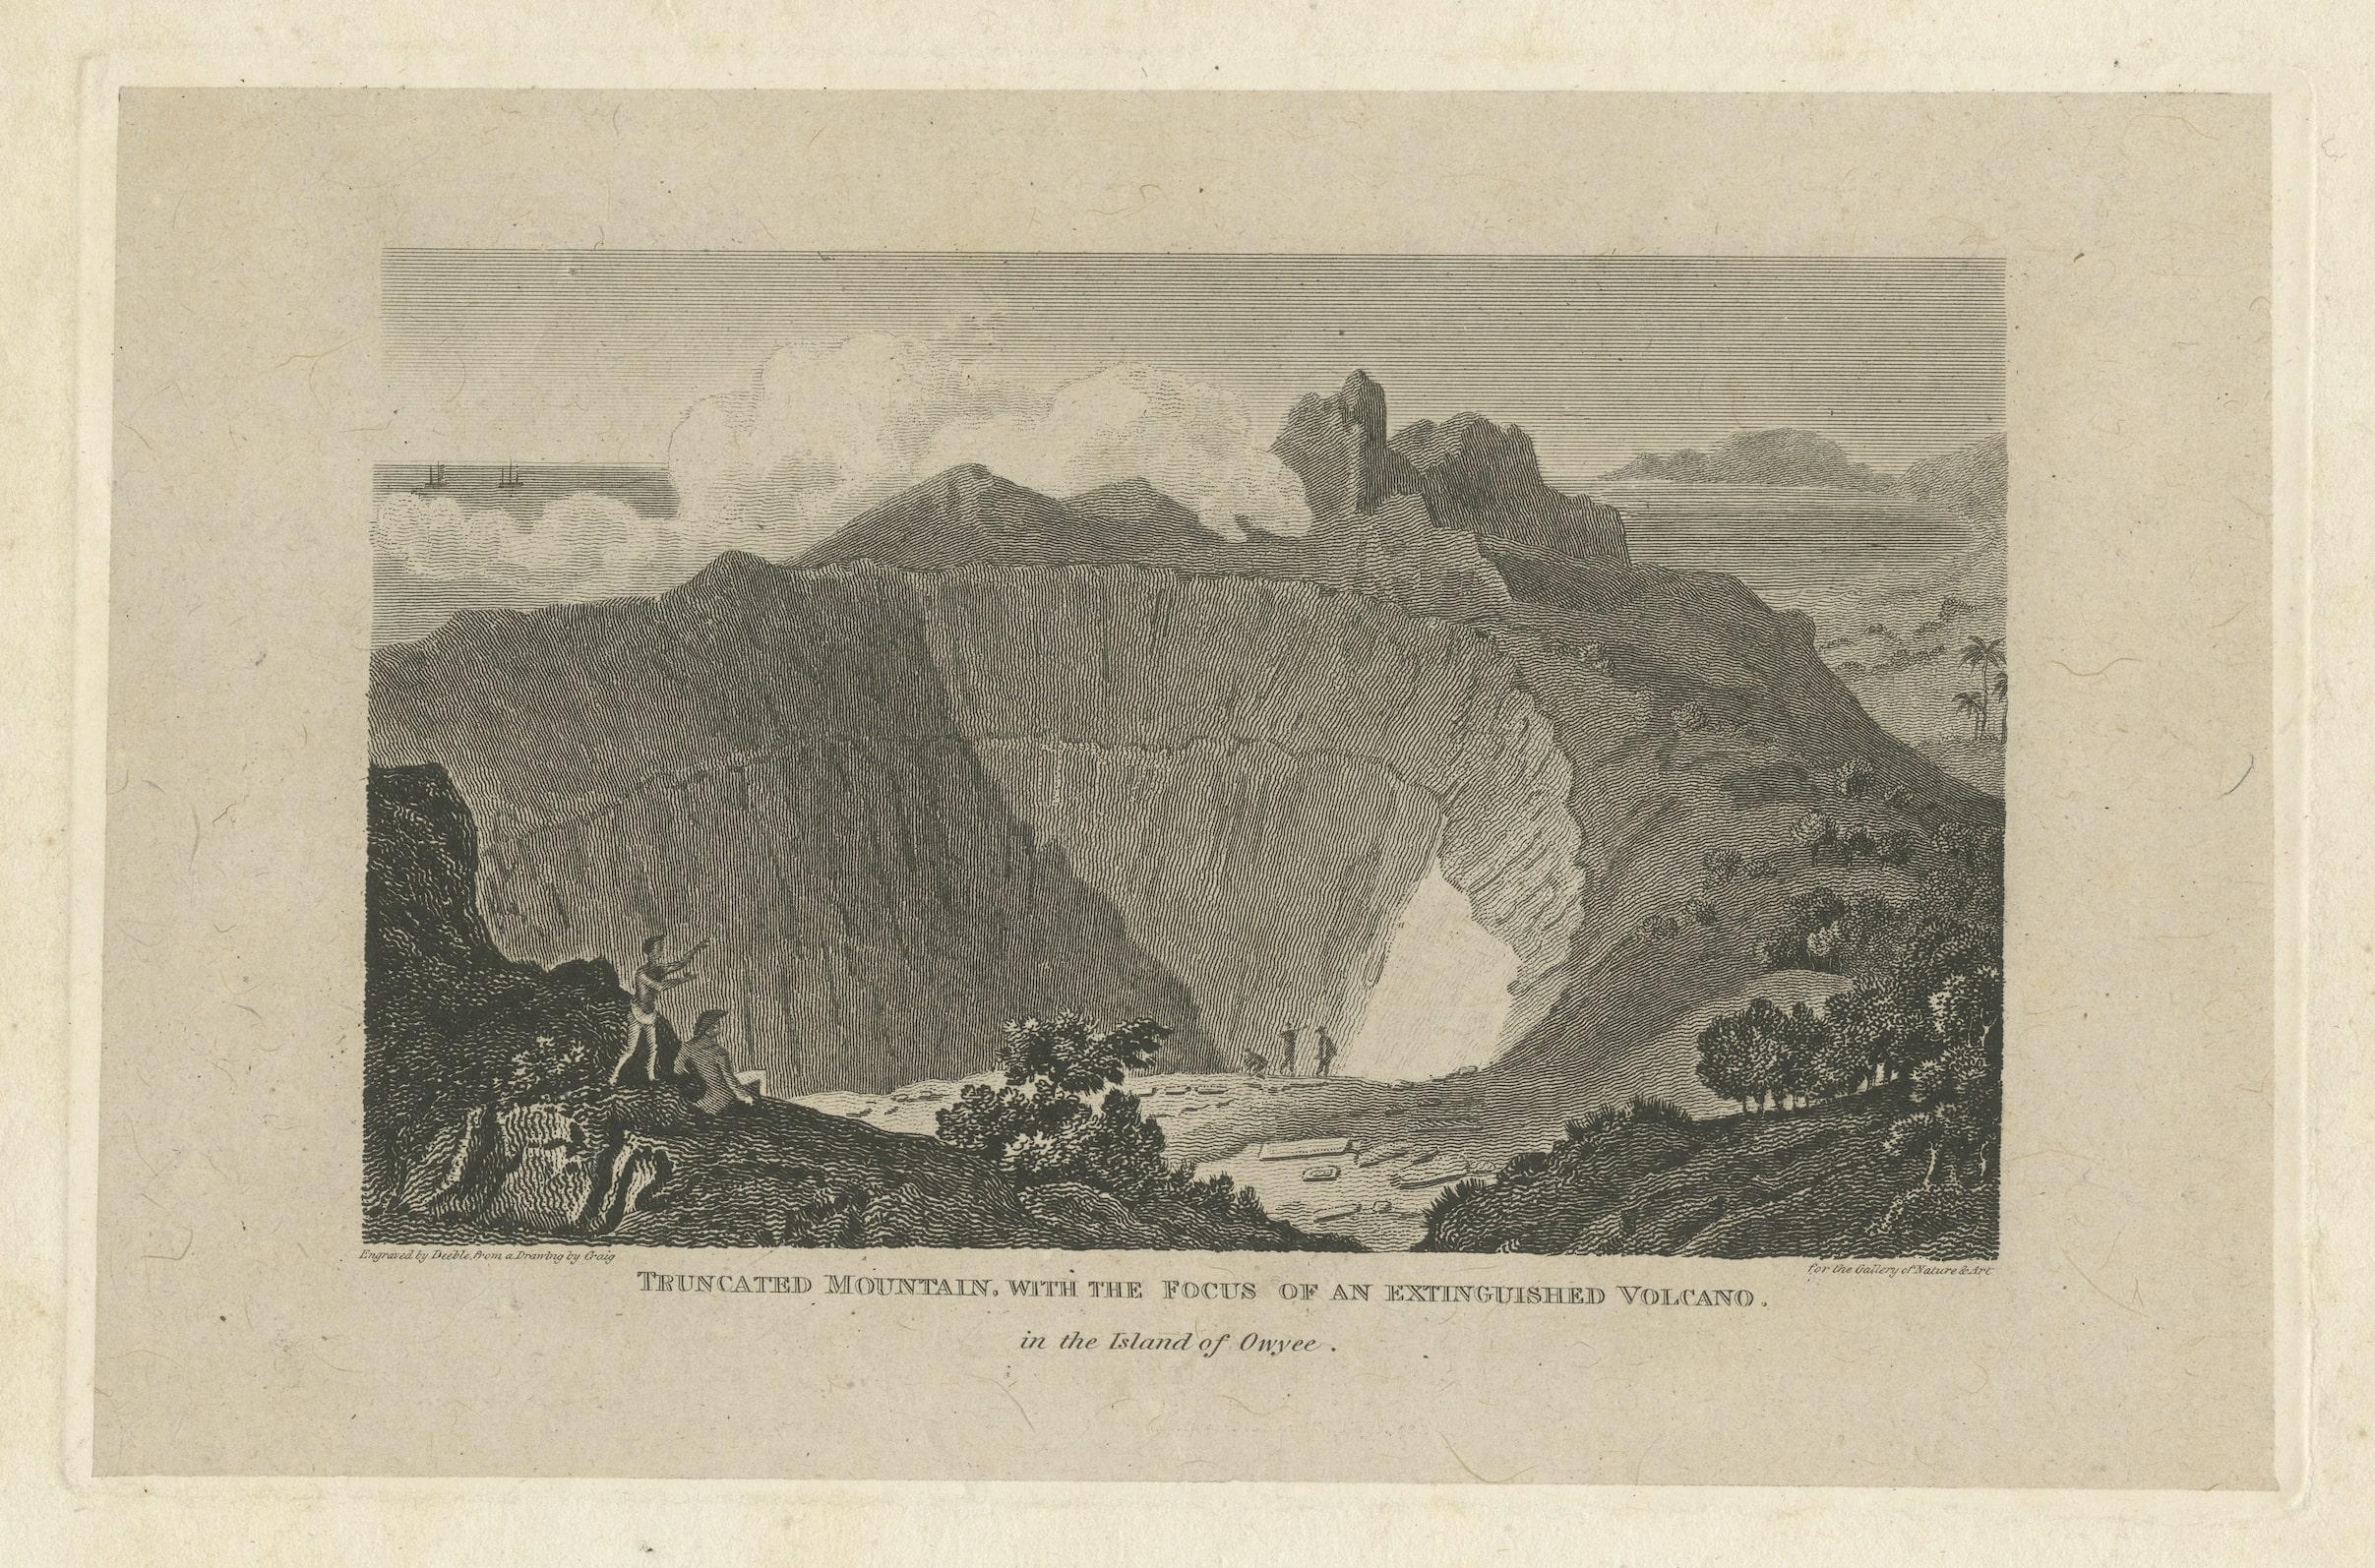 Title: Truncated Mountain, with the focus of an extinguished volcano in the island of Owyhee. 

Engraved by Deeble, from a drawing by Craig for the gallery of nature and art

Source: The Gallery of Nature and Art; Or, A Tour Through Creation and